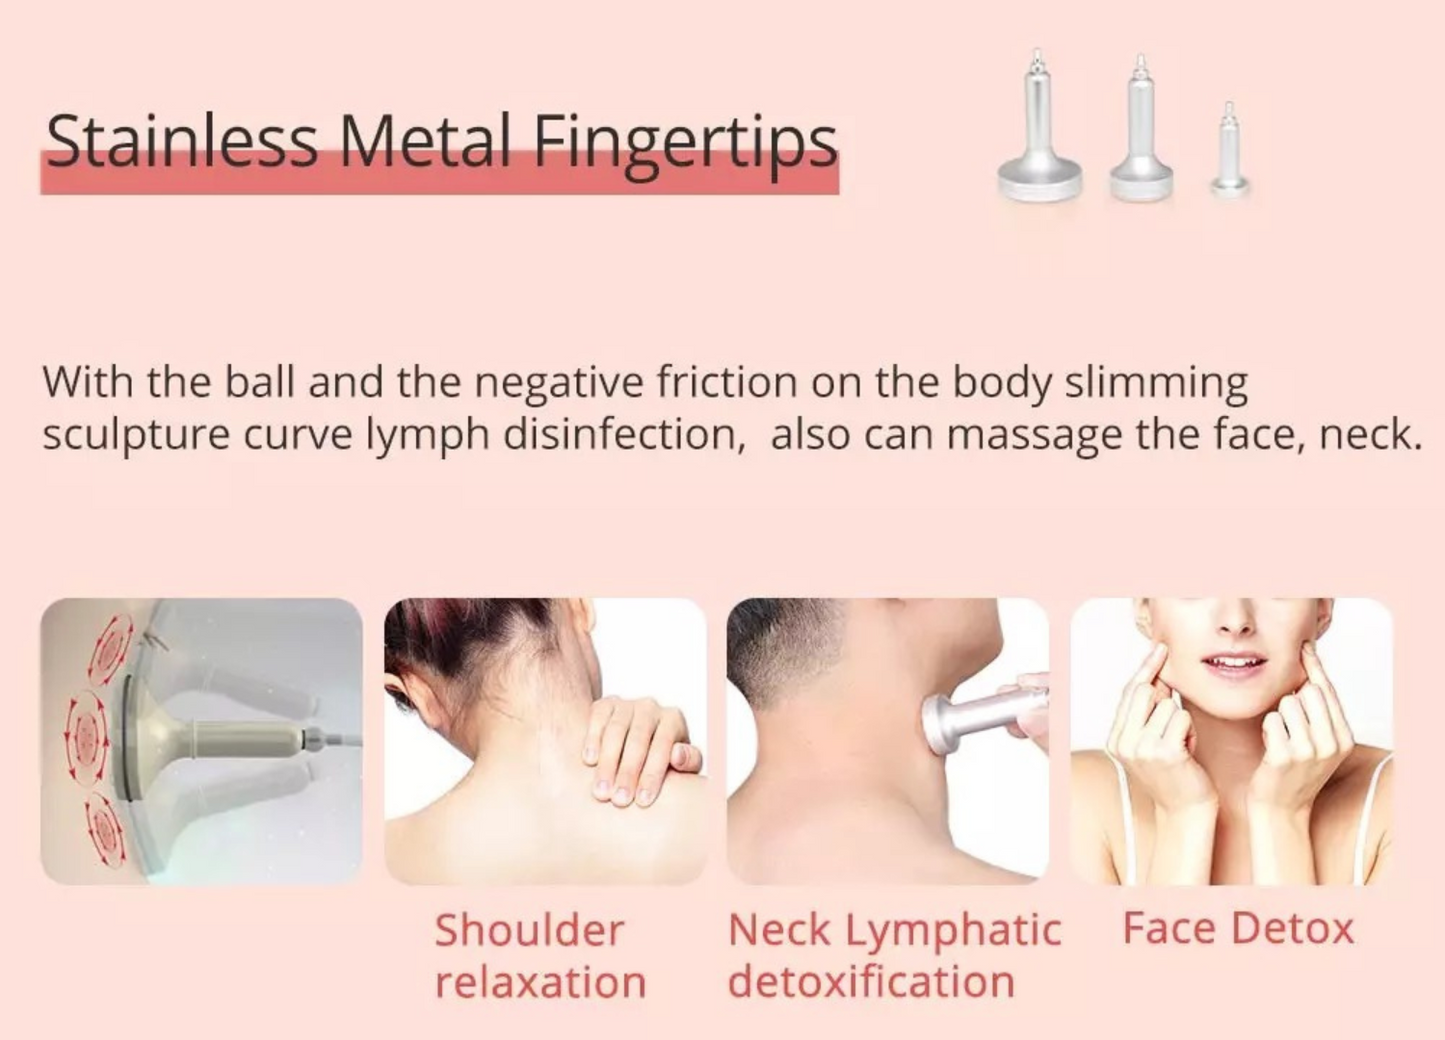 Stainless Metal Finger Tips for relaxation of shoulder and face detox